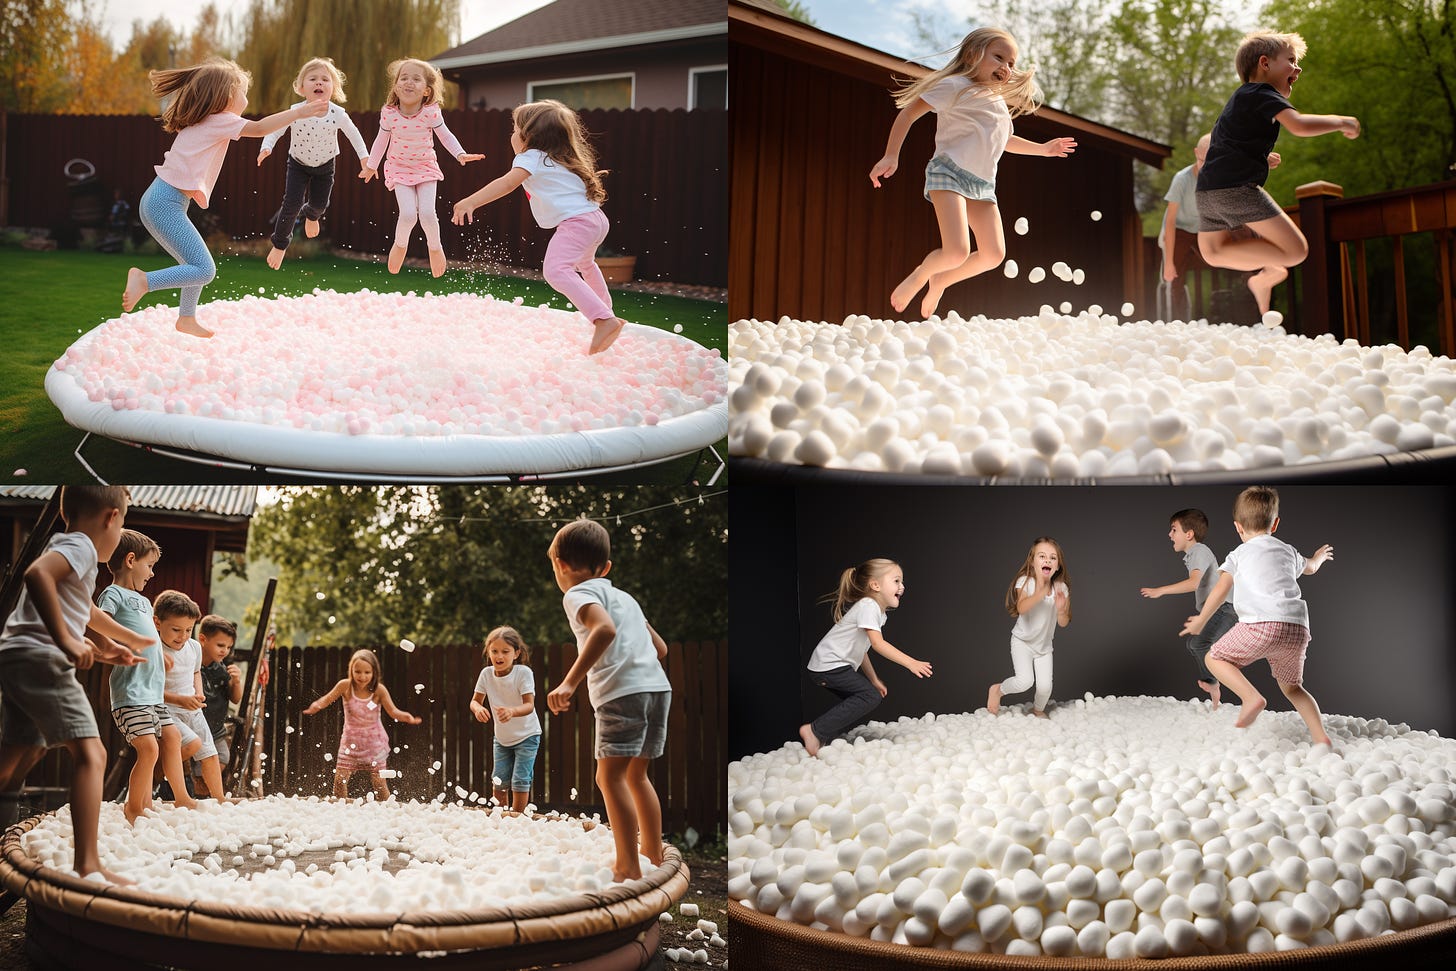 Midjourney V5 results for "kids jumping on a trampoline made of marshmallows" -  4-image grid.